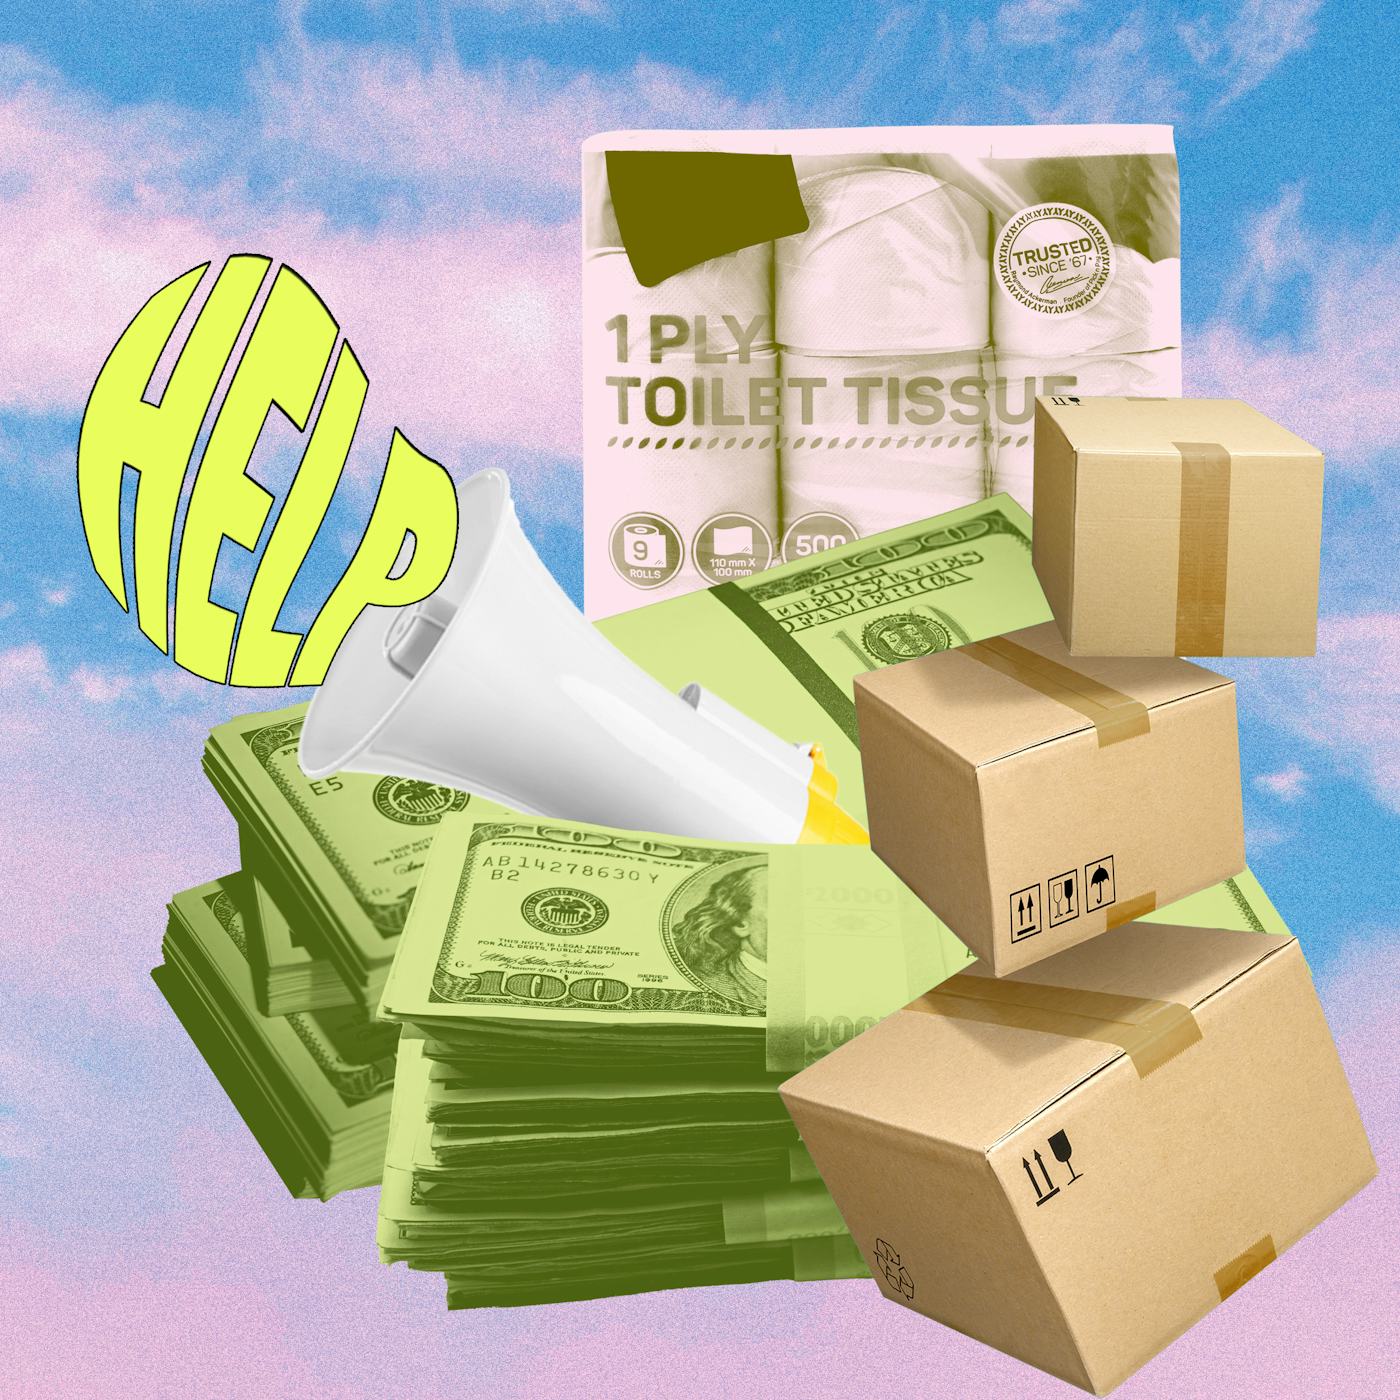 A collage with money, cardboard boxes, toilet paper, and a megaphone, overlayed by a large "HELP" in stylized text.